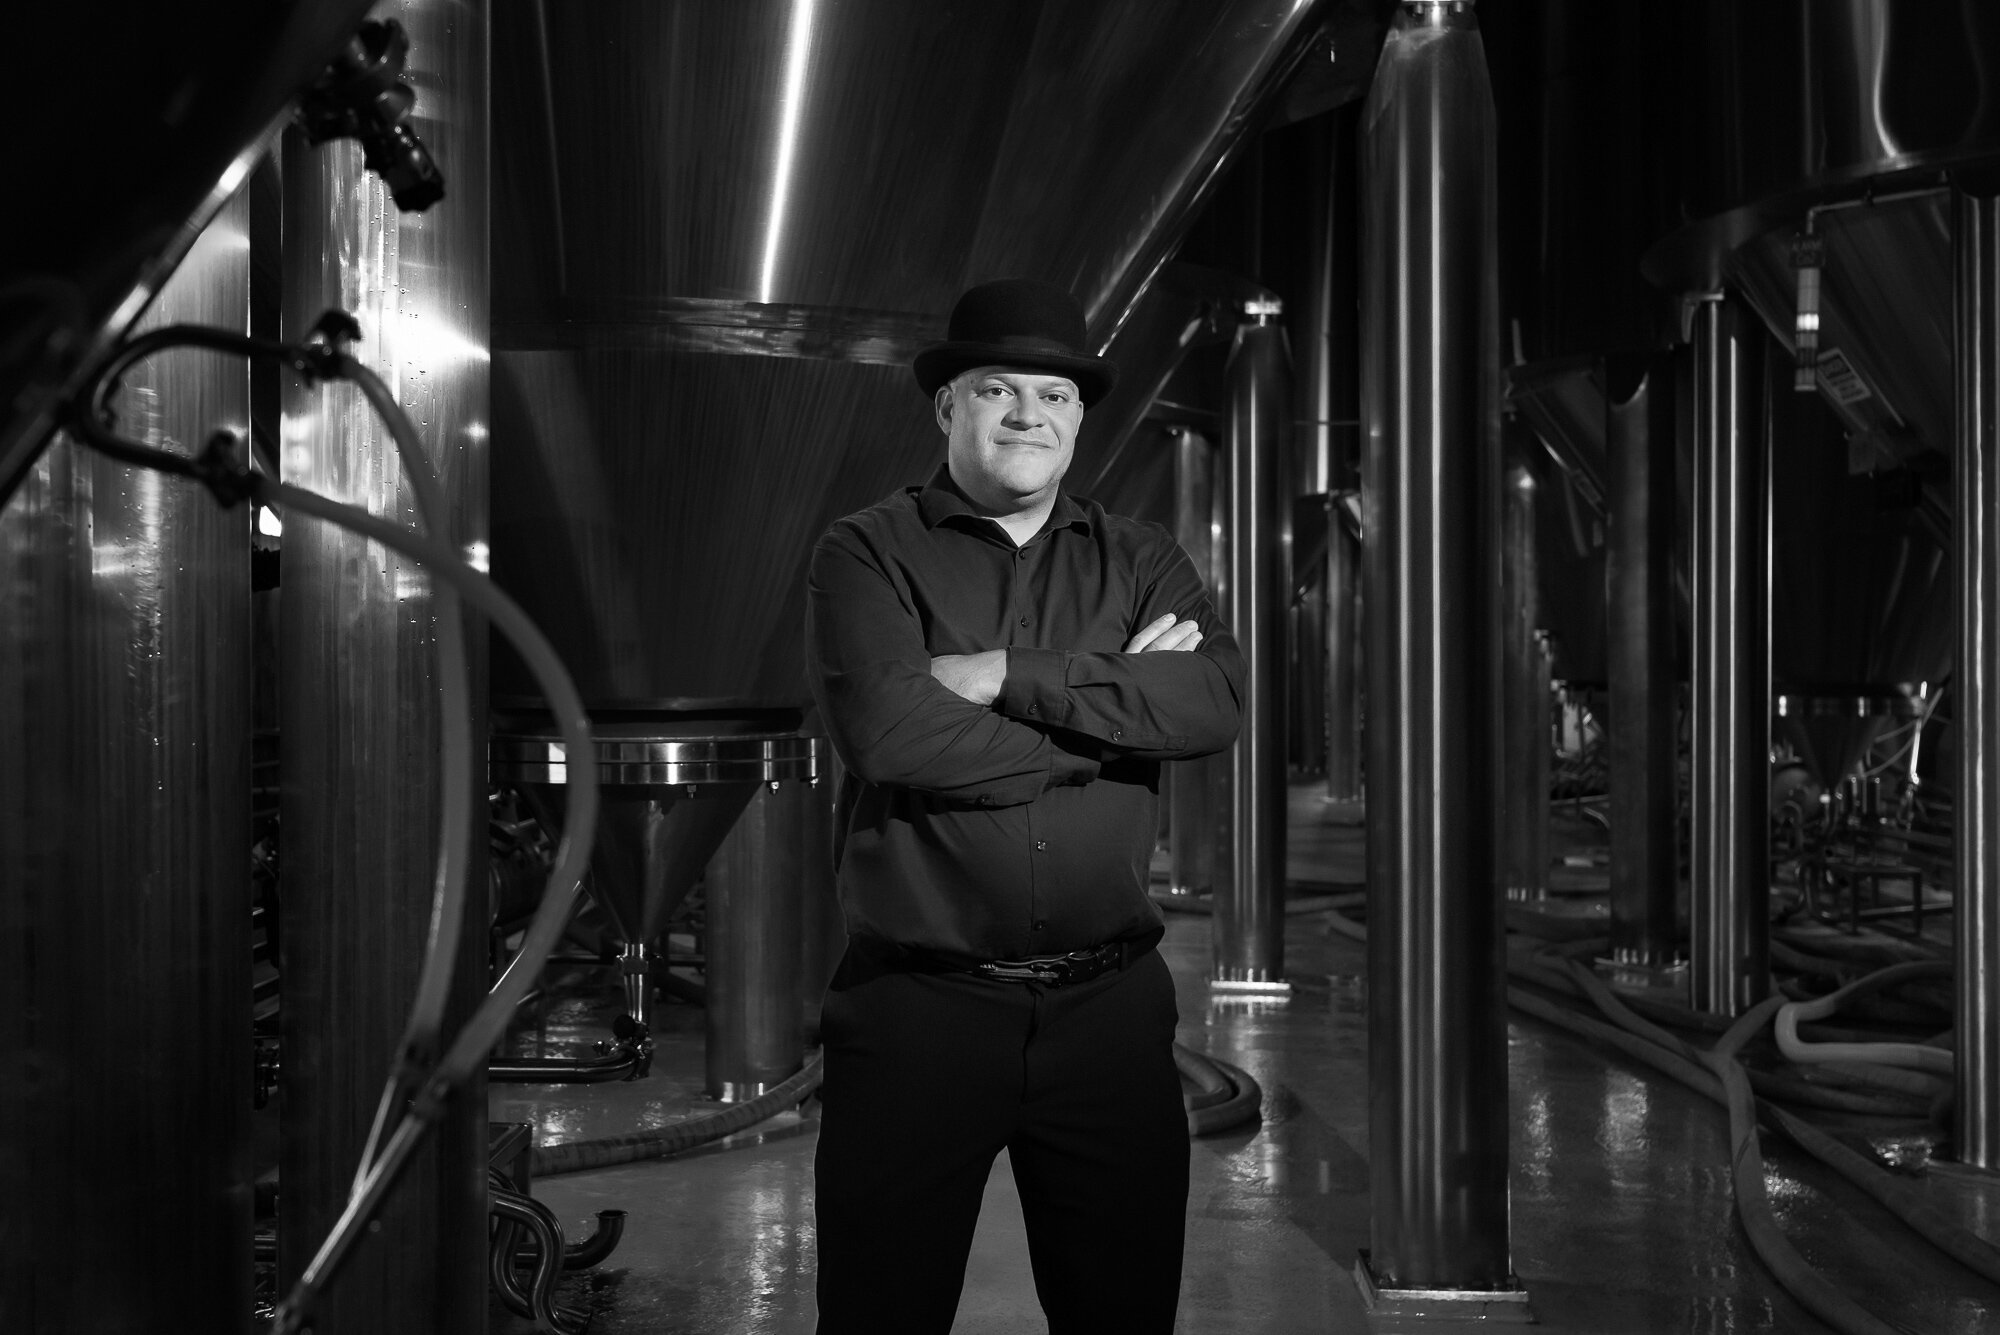   Jerry Vietz, Unibroue Brewmaster since 2007.  